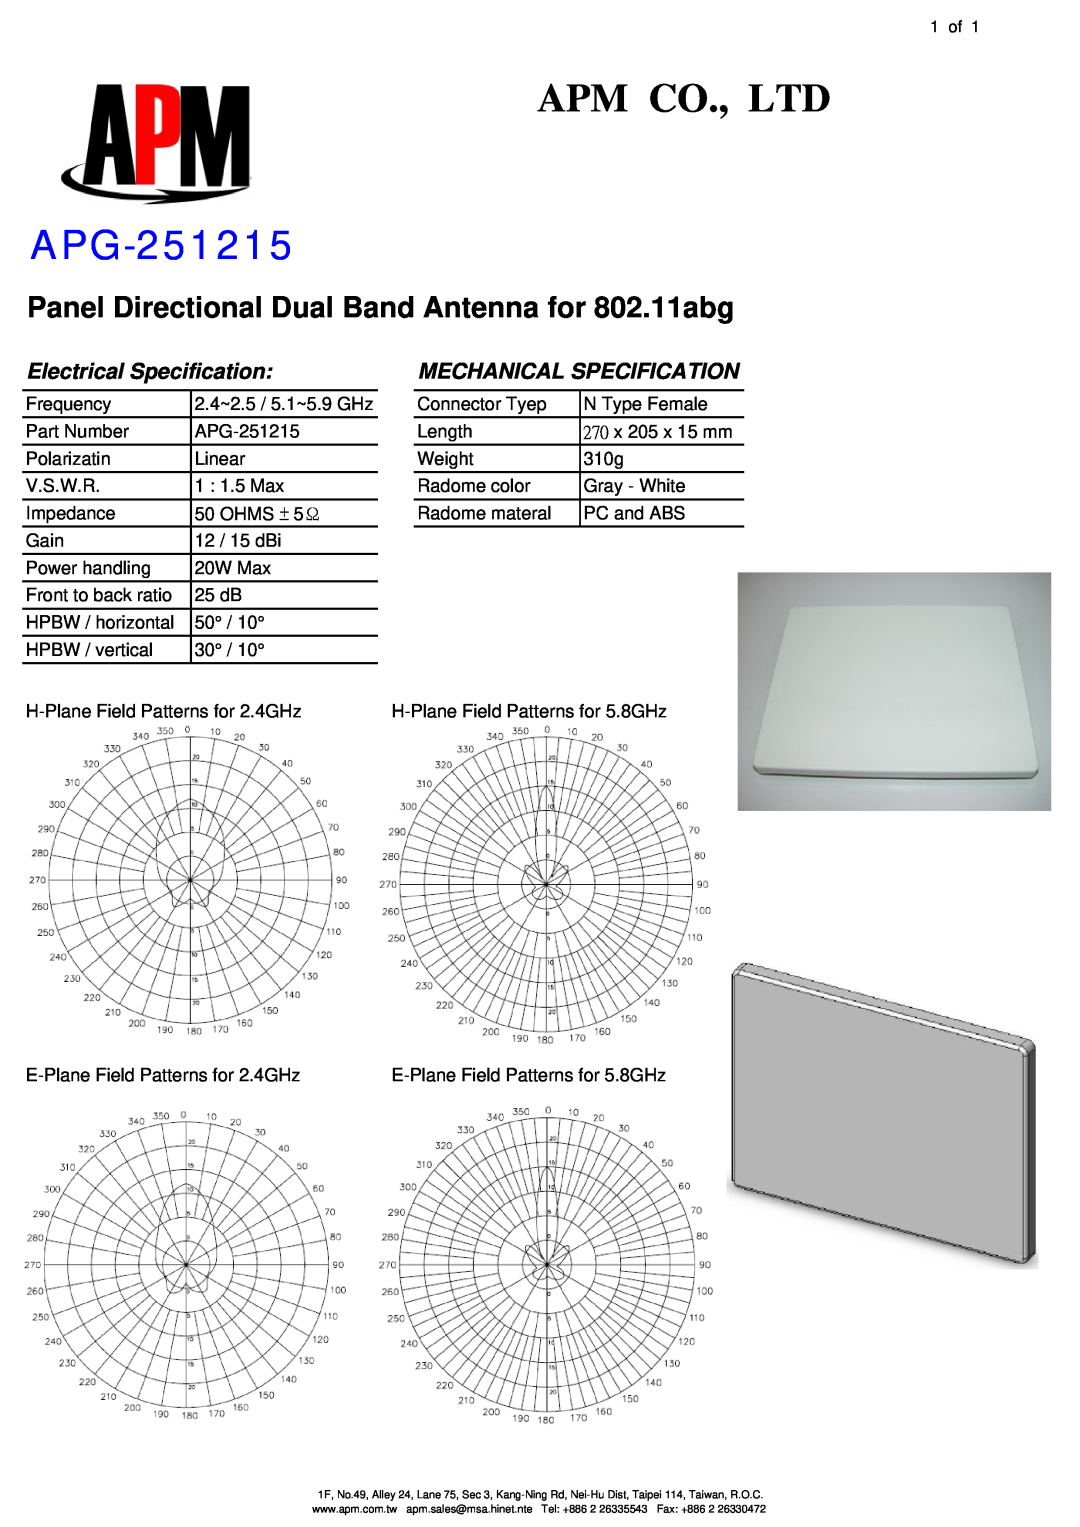 APM APG-251215 manual Panel Directional Dual Band Antenna for 802.11abg, Electrical Specification 